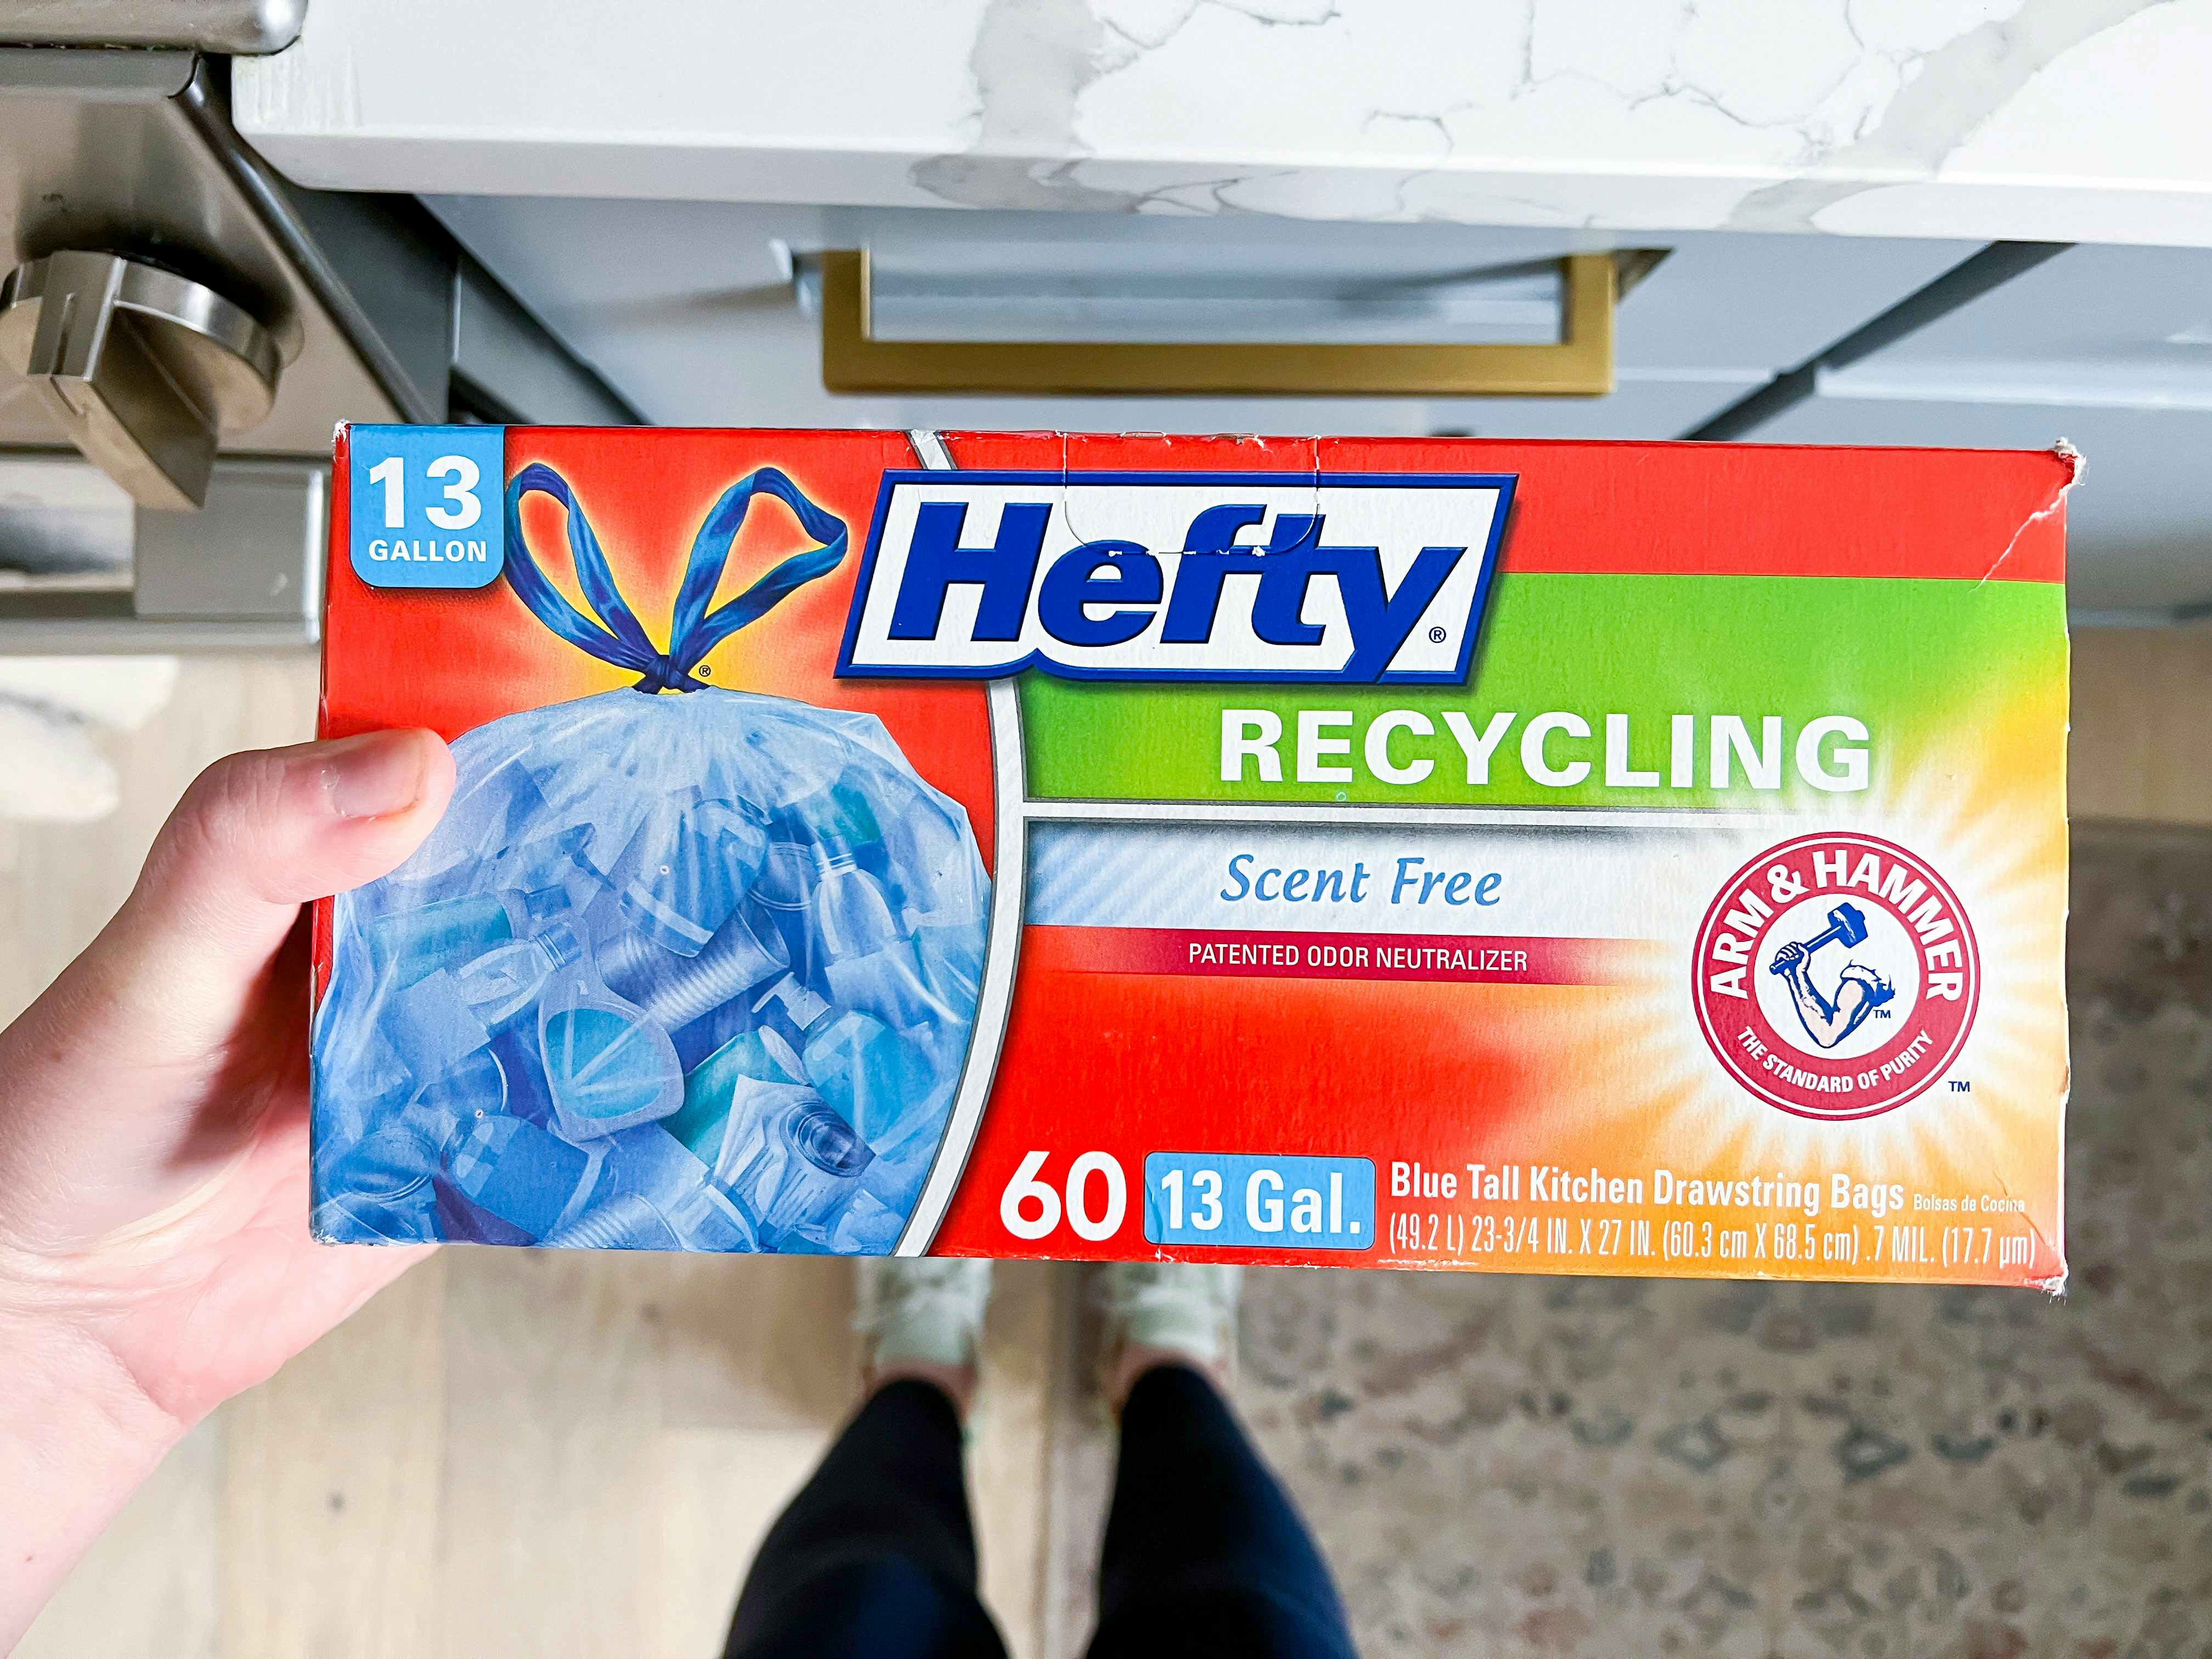 https://prod-cdn-thekrazycouponlady.imgix.net/wp-content/uploads/2022/02/hefty-recycle-trash-bags3-1645560698-1645560698.jpg?auto=format&fit=fill&q=25